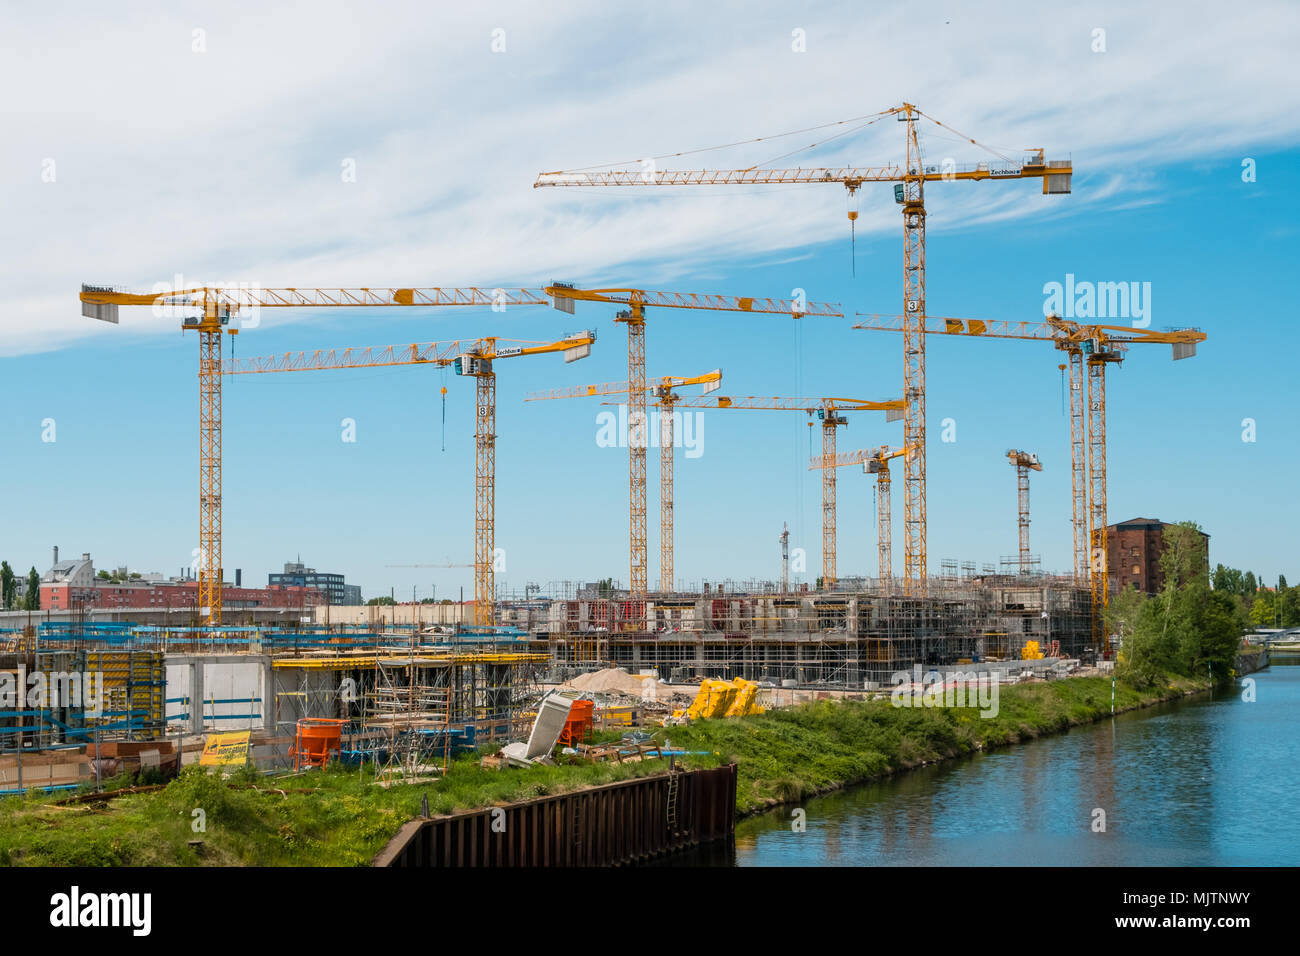 Berlin, Germany - may 2018: Many cranes on constuction site of the Quartier Europacity in Berlin, Germany Stock Photo